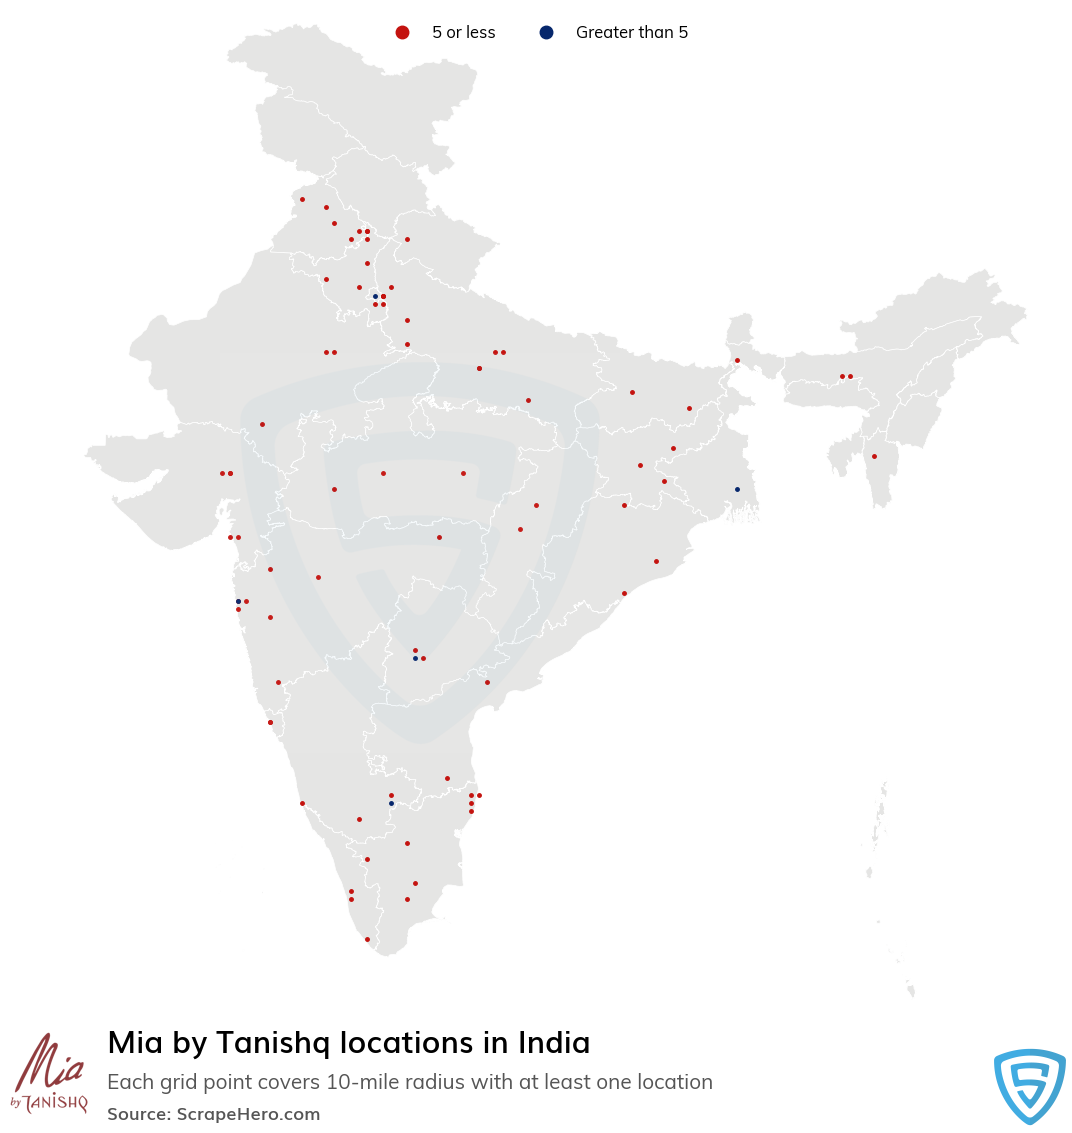 Map of Mia by Tanishq stores in India